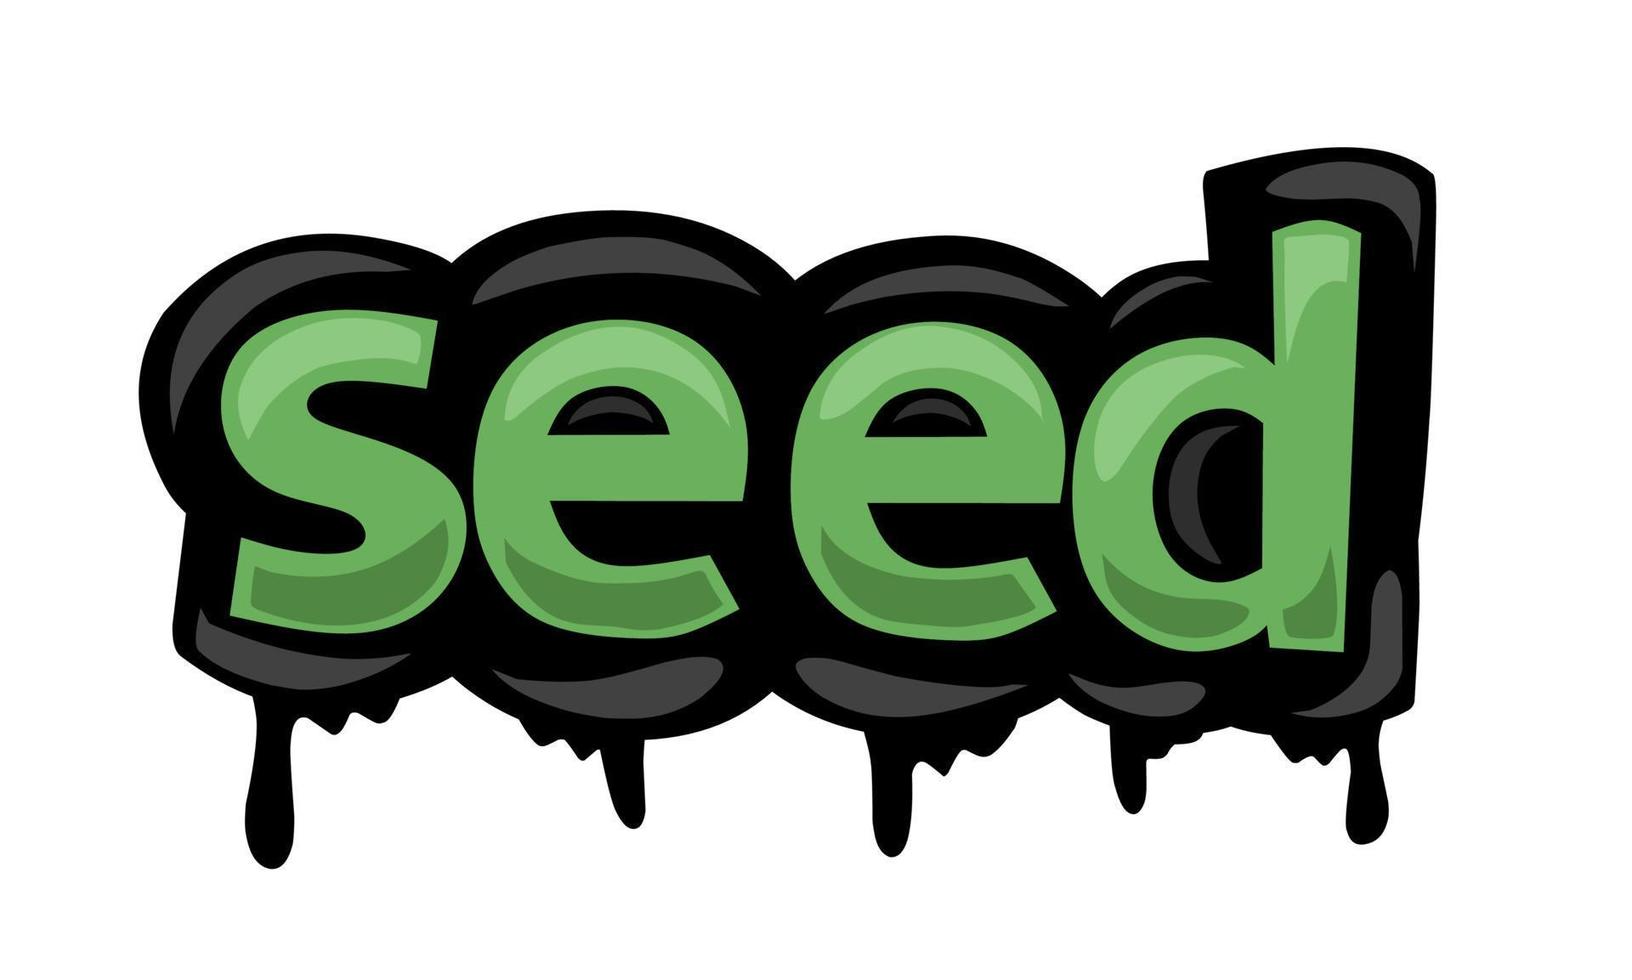 SEED writing vector design on white background